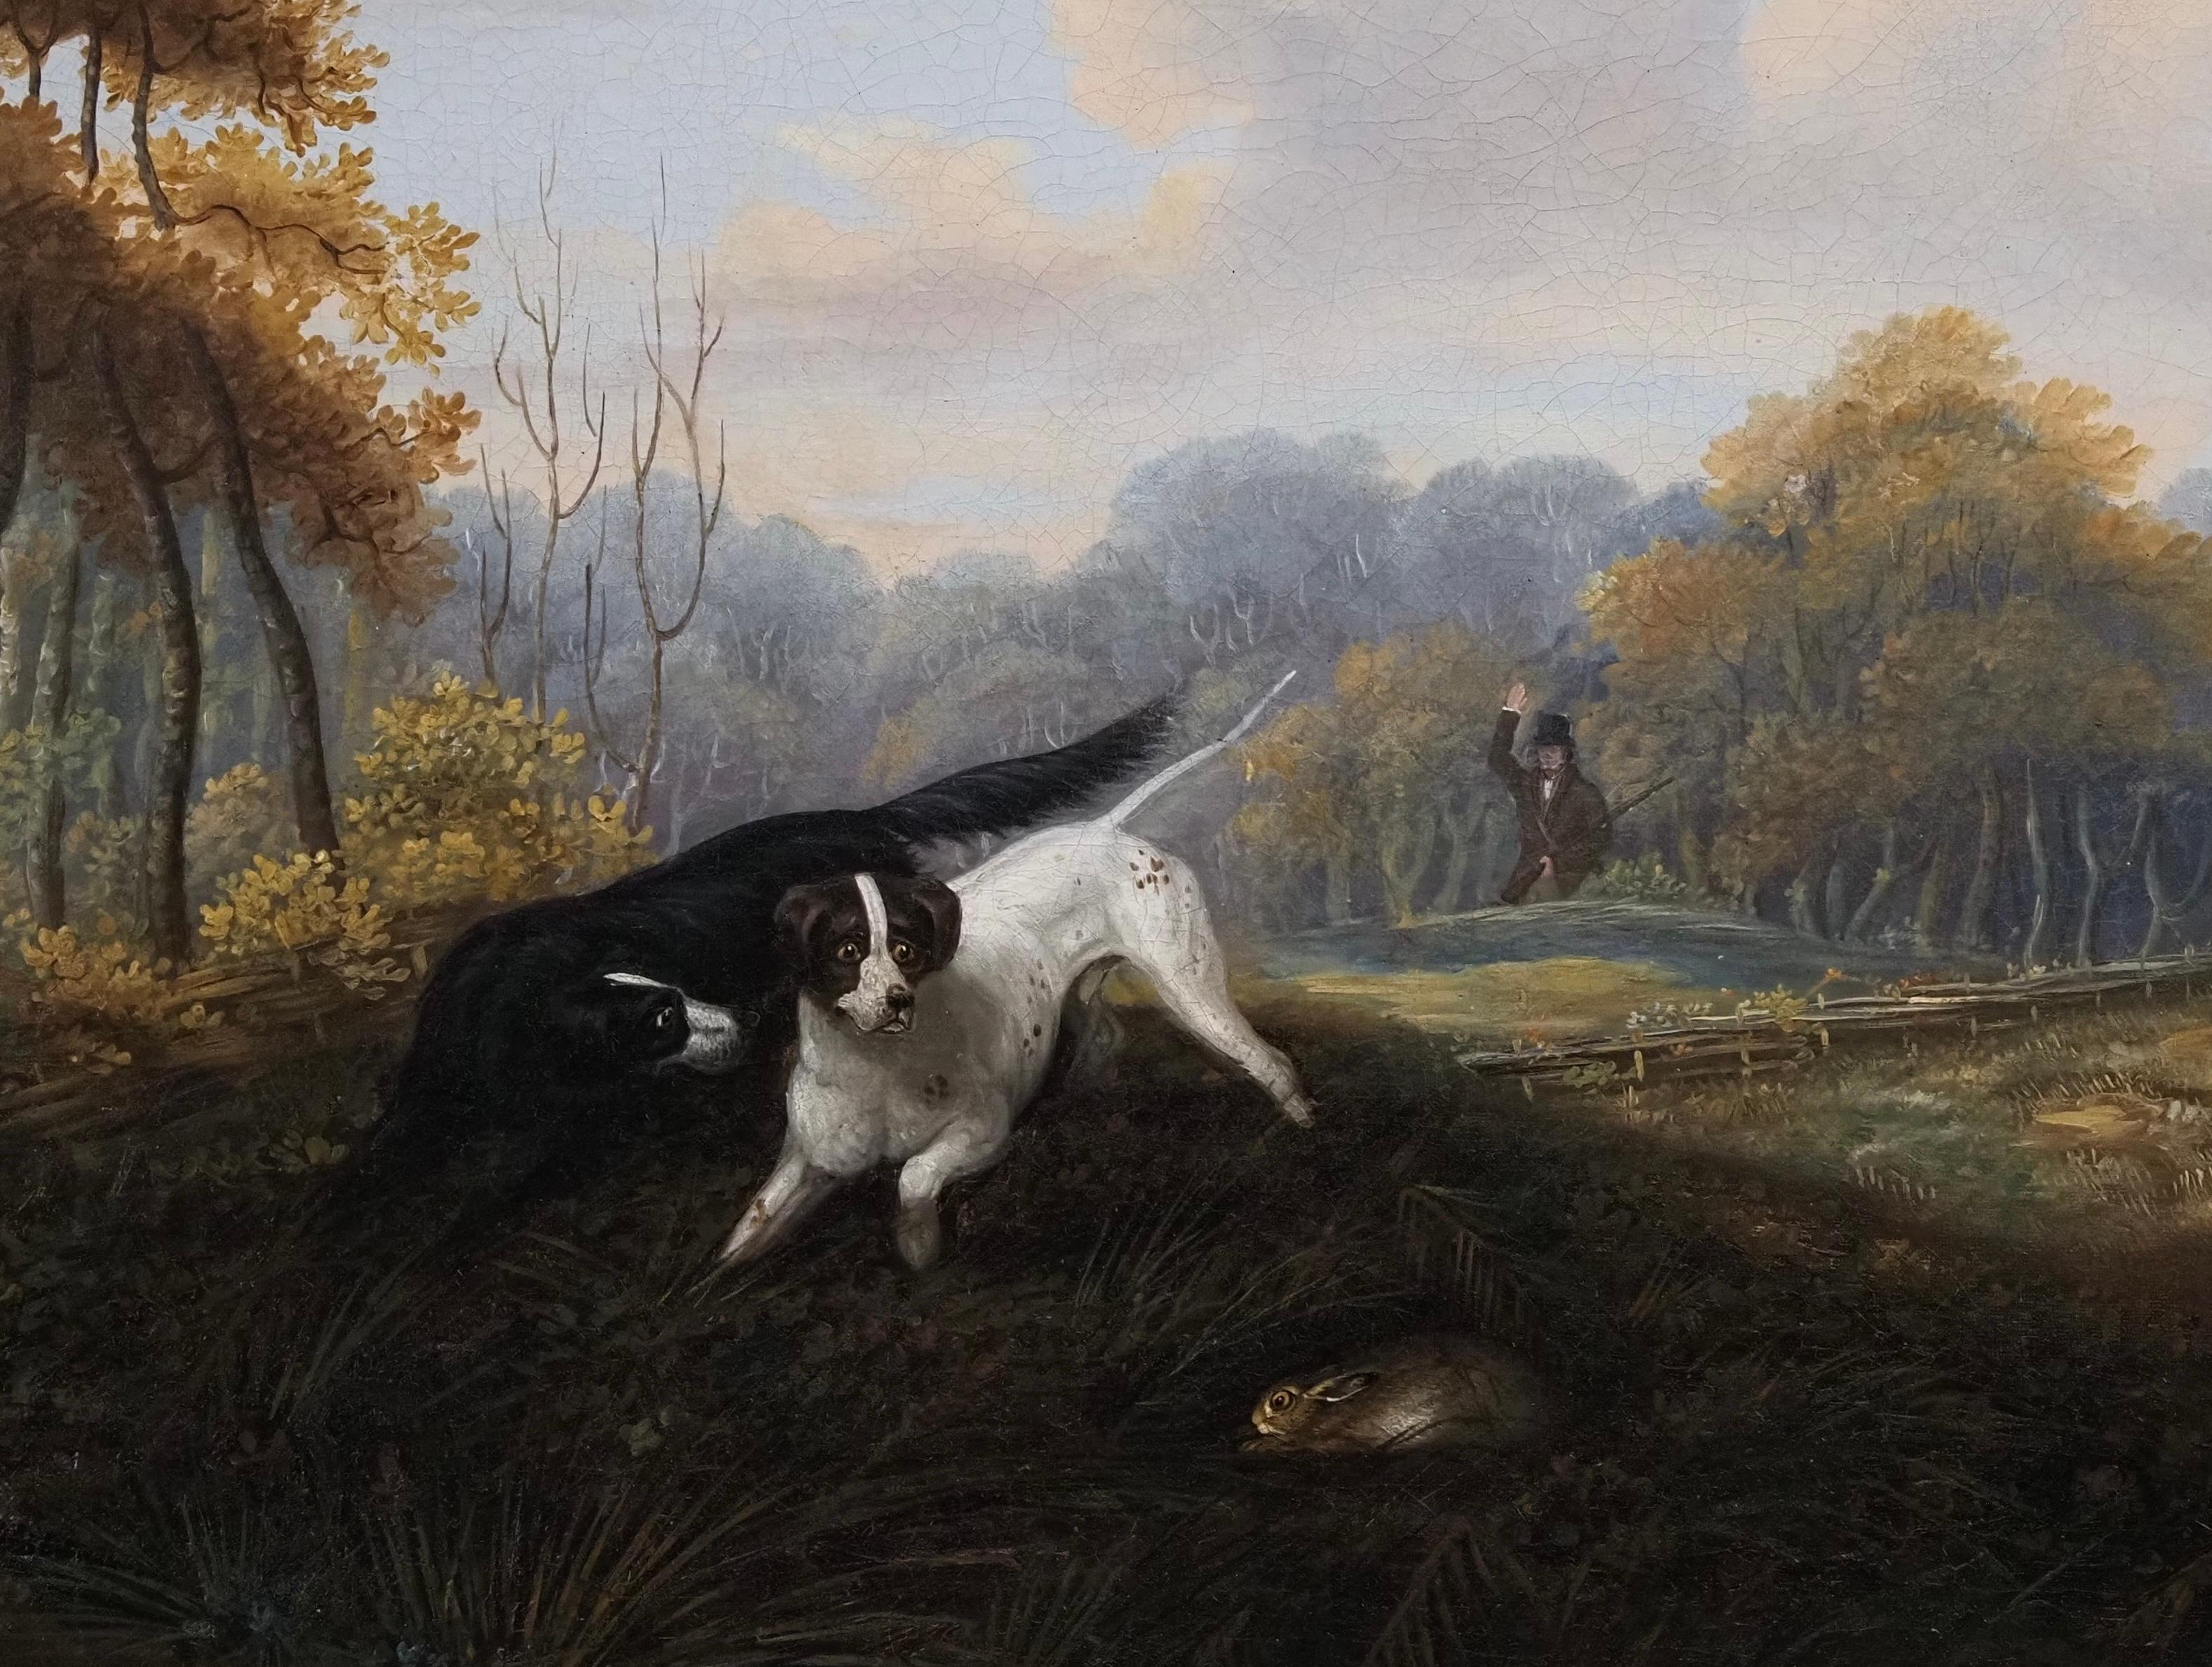 William Jones (c.1798-1860)
Two spaniels working with a huntsman beyond
Oil on canvas
Canvas Size - 16 x 21 in
Framed Size - 21 x 26 in

William Jones’s work is well-known, emanating from the first half of the 19th century, and so it is surprising